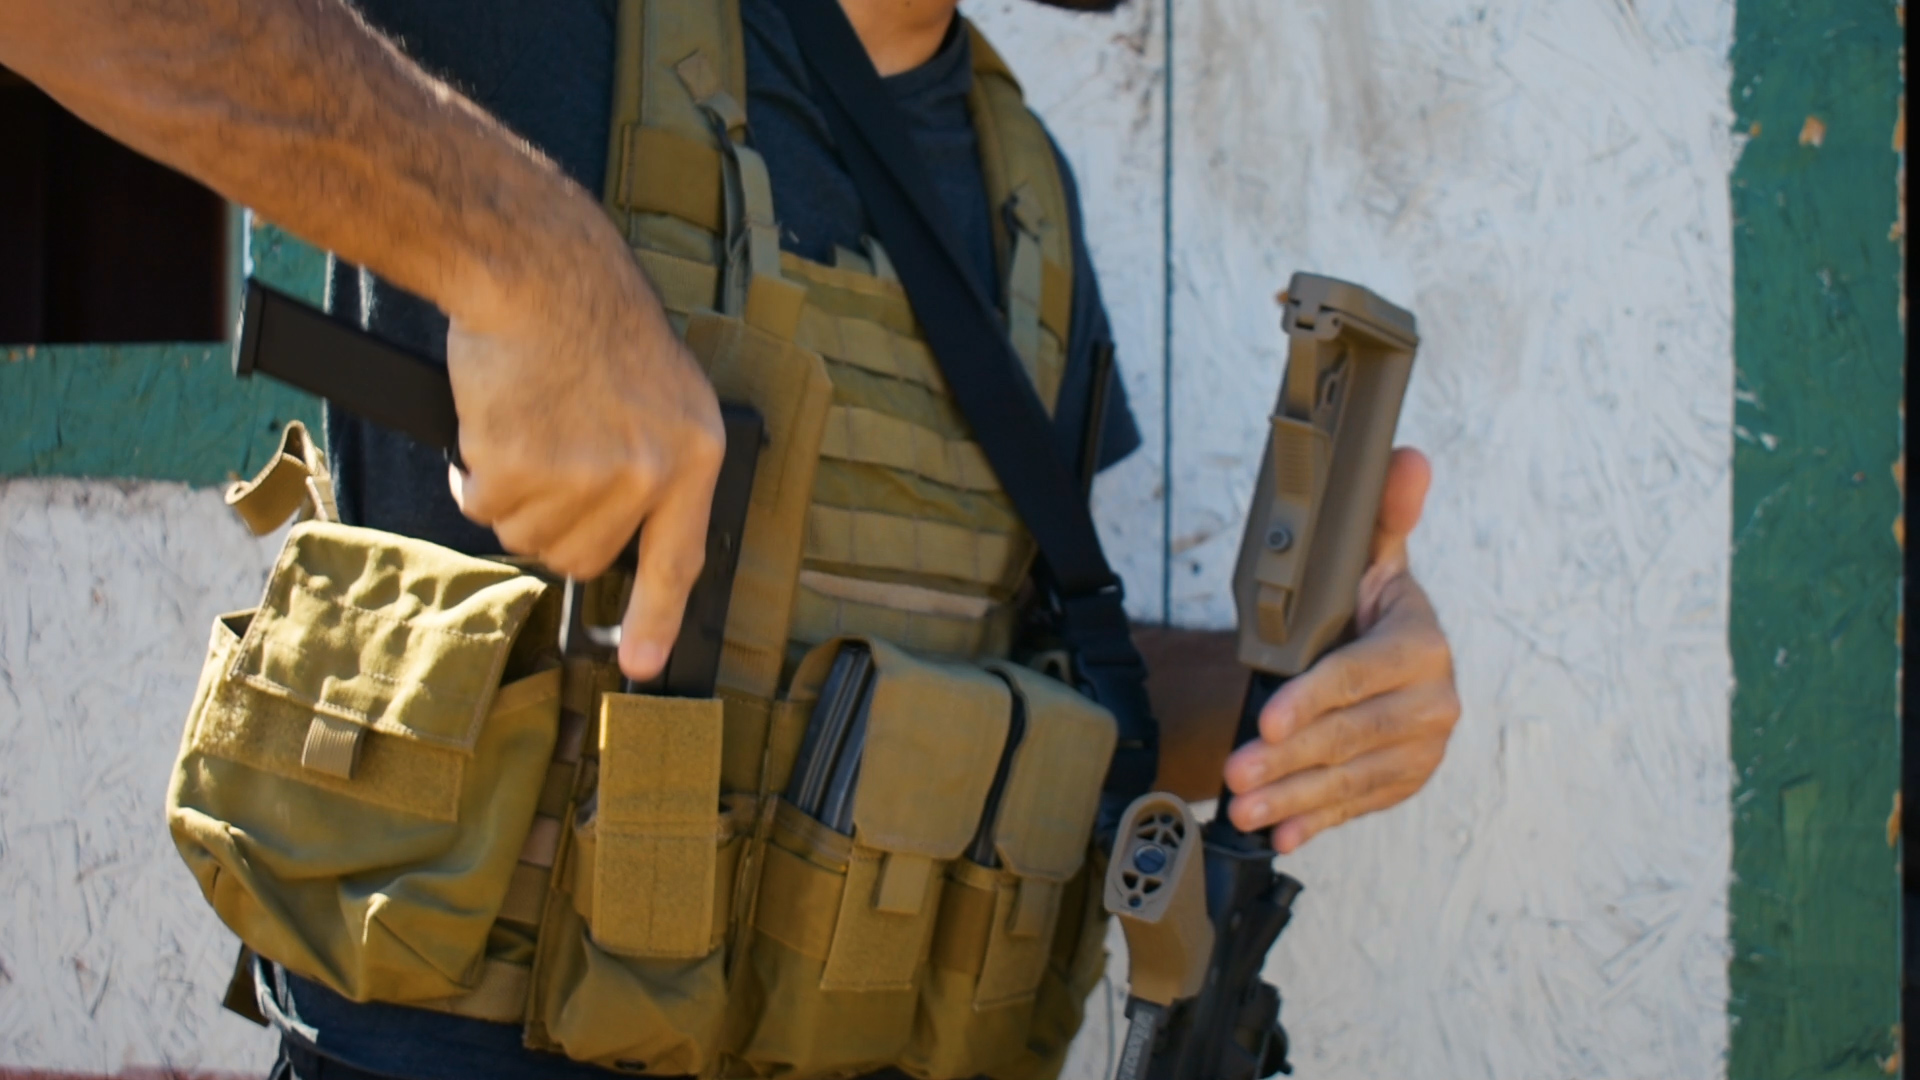 Airsoft player wearing tactical vest with attached pistol holster and magazine pouches